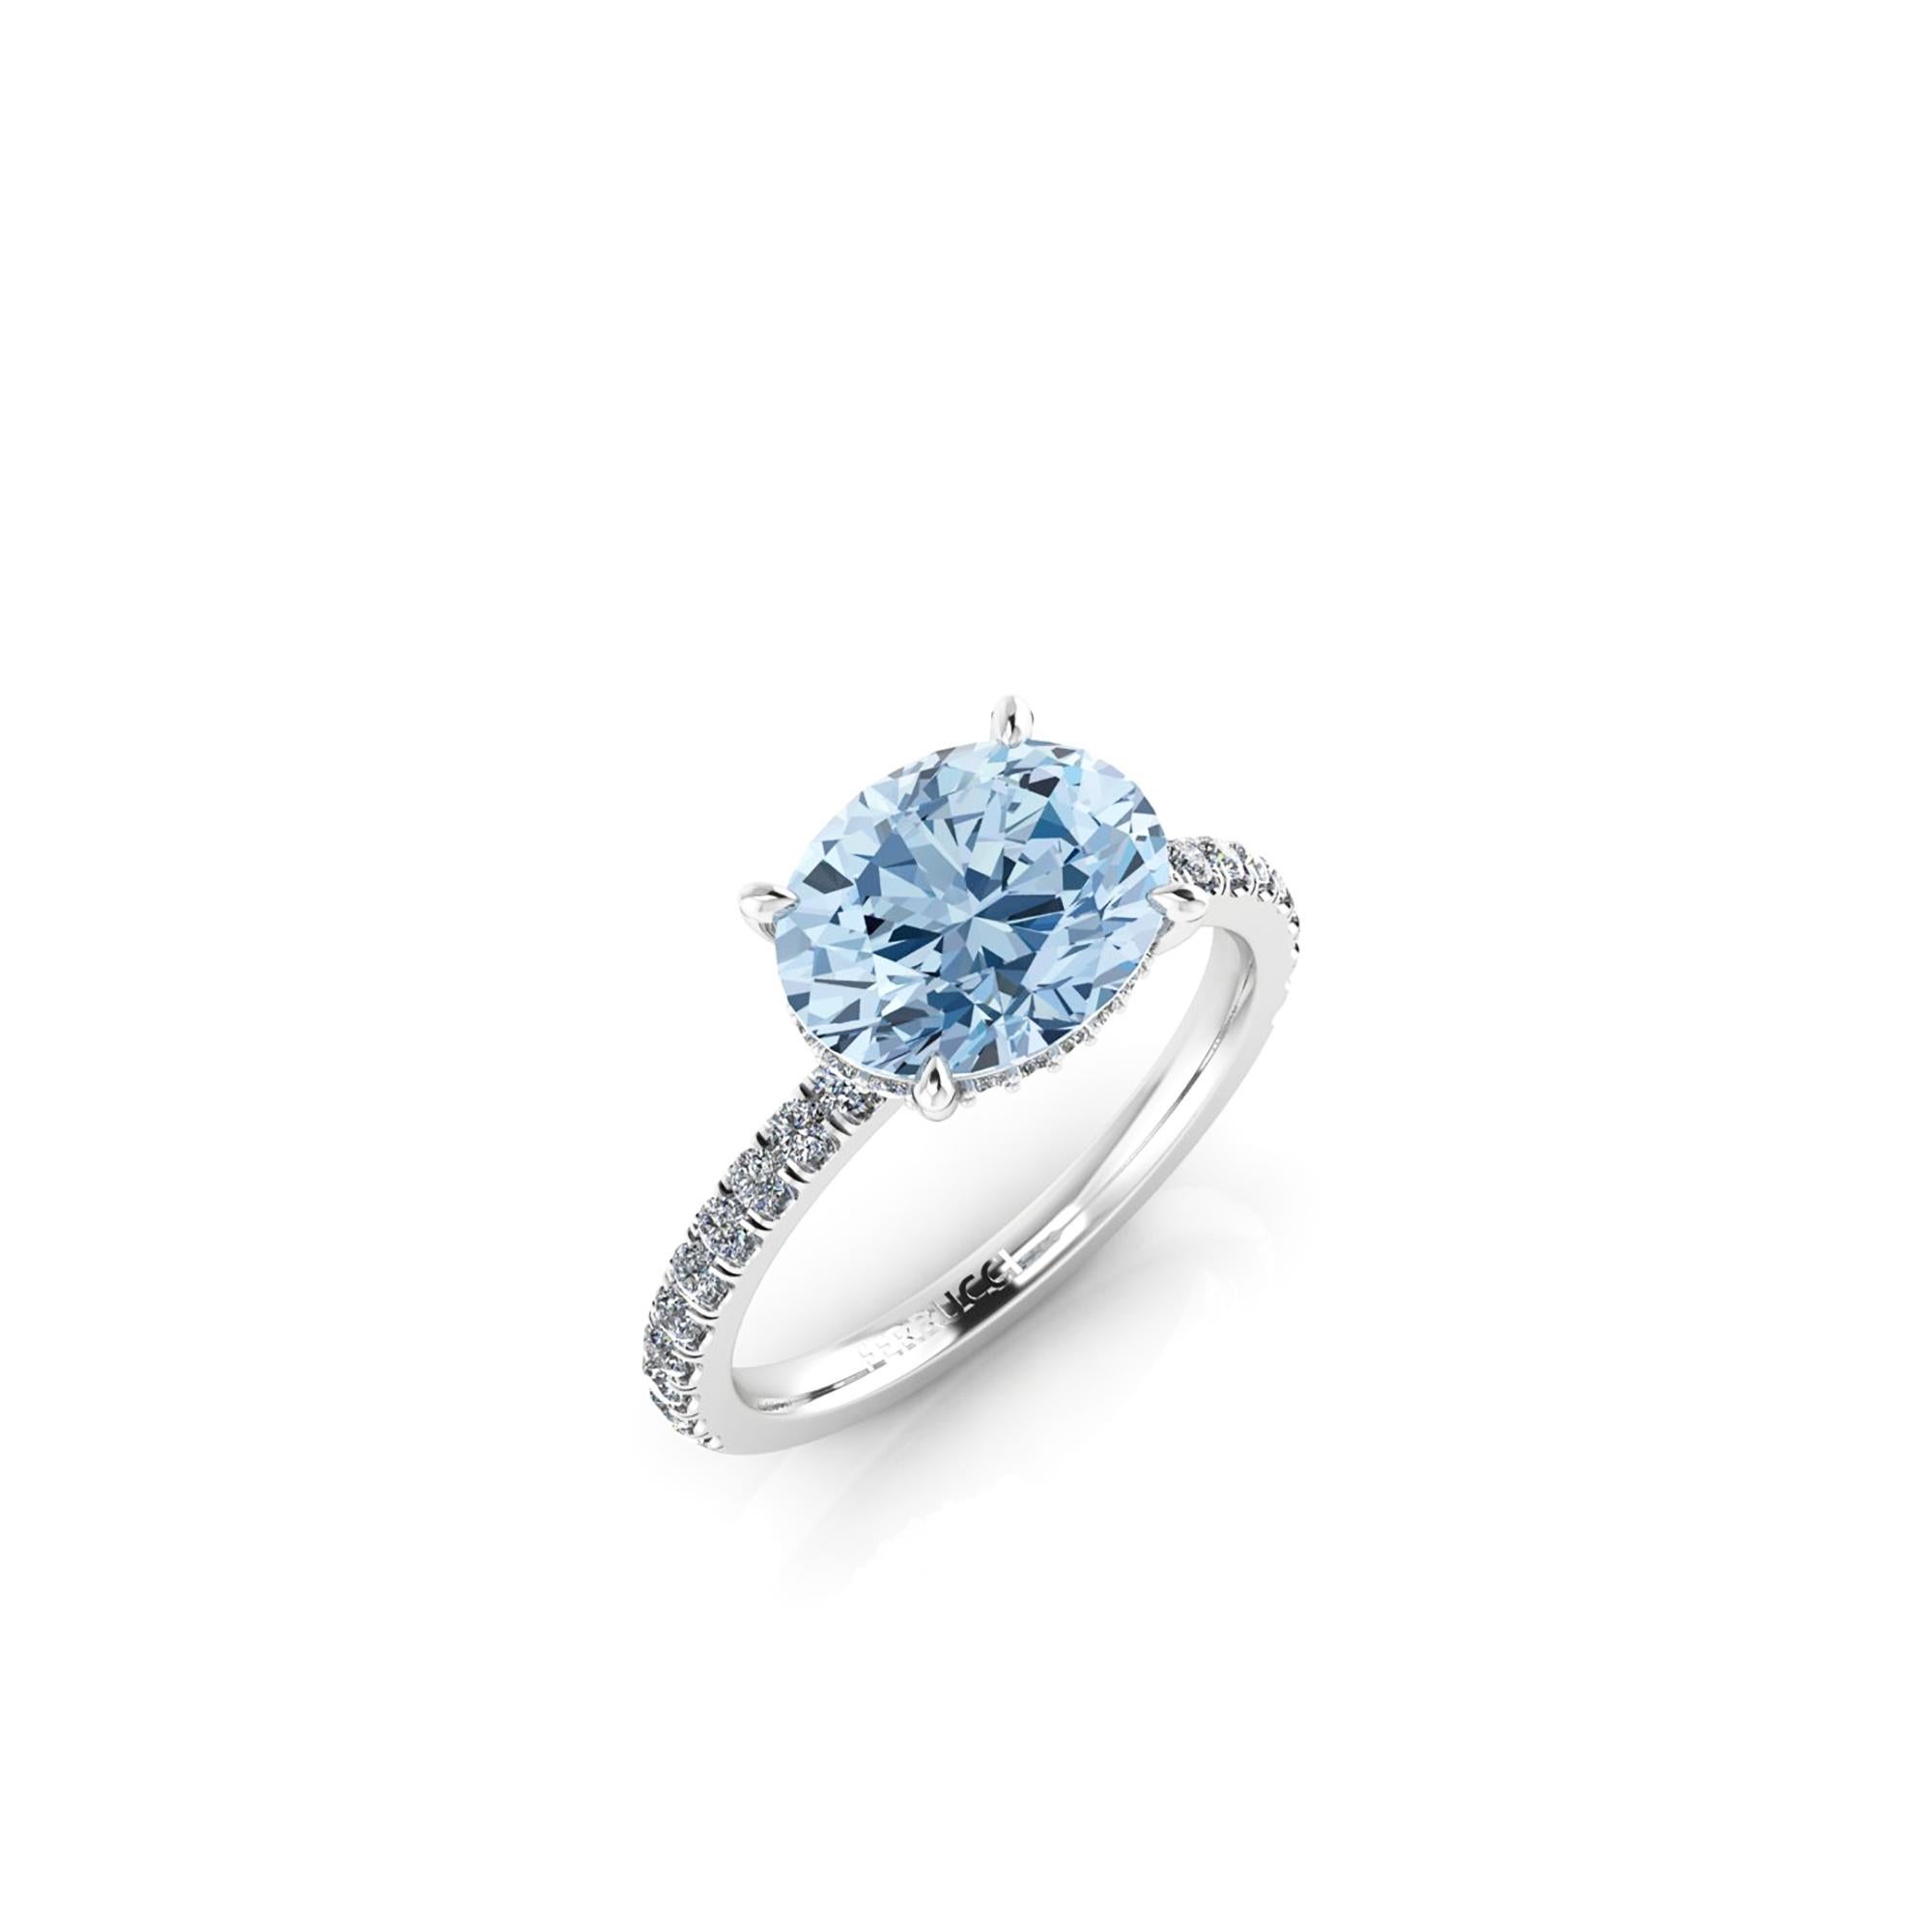  2.5 carat horizontal, set east to west Oval blue Aquamarine, set on a Platinum 950 ring, designed and hand made in New York 
adorned by white round diamonds, hand set, for an approximate 0.60 carats, for a maximum shine and sparkle.

This ring's